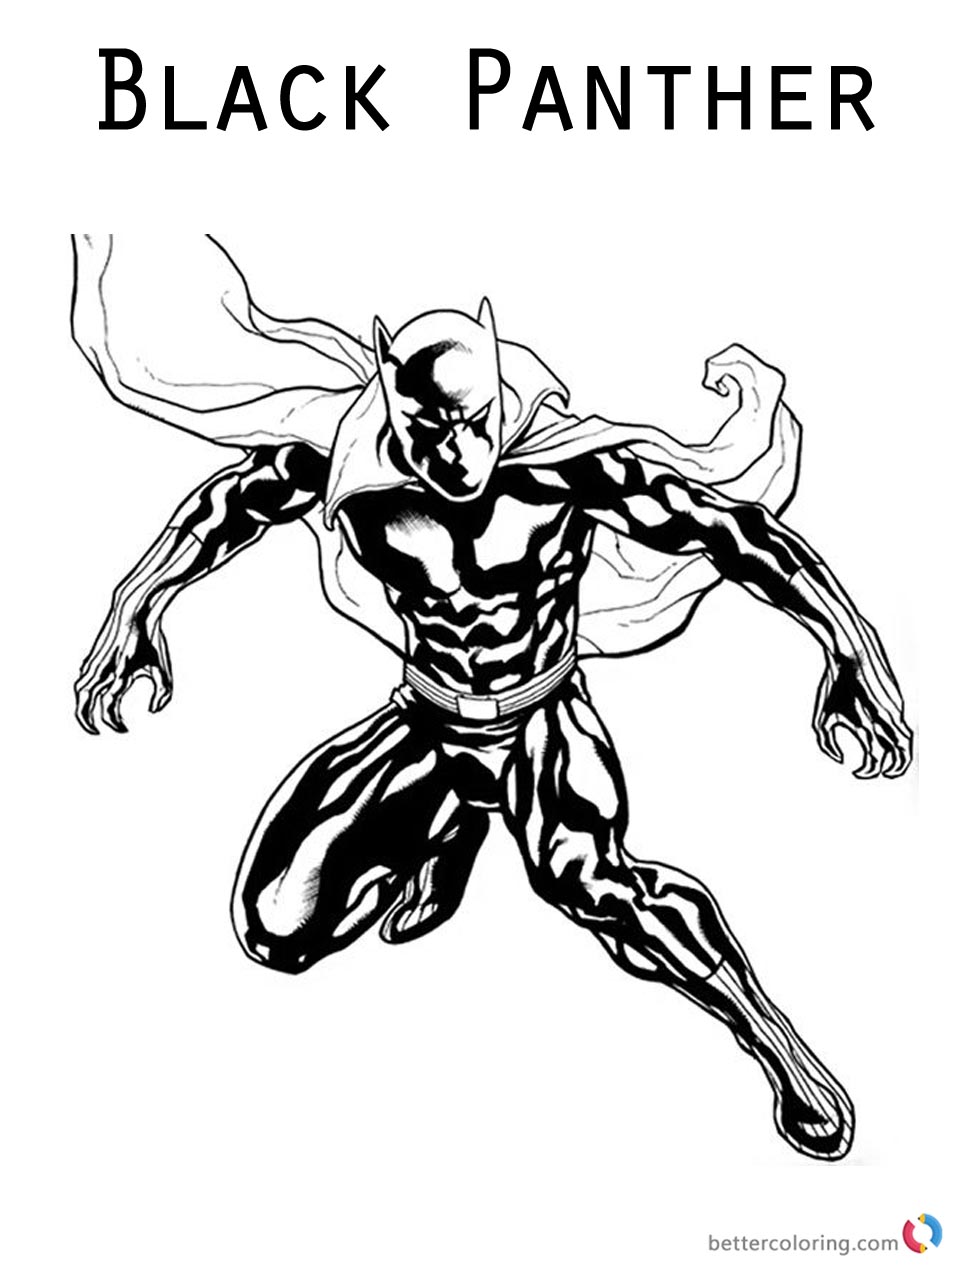 Movie Black Panther Coloring Pages Jumping to Fight Free Printable